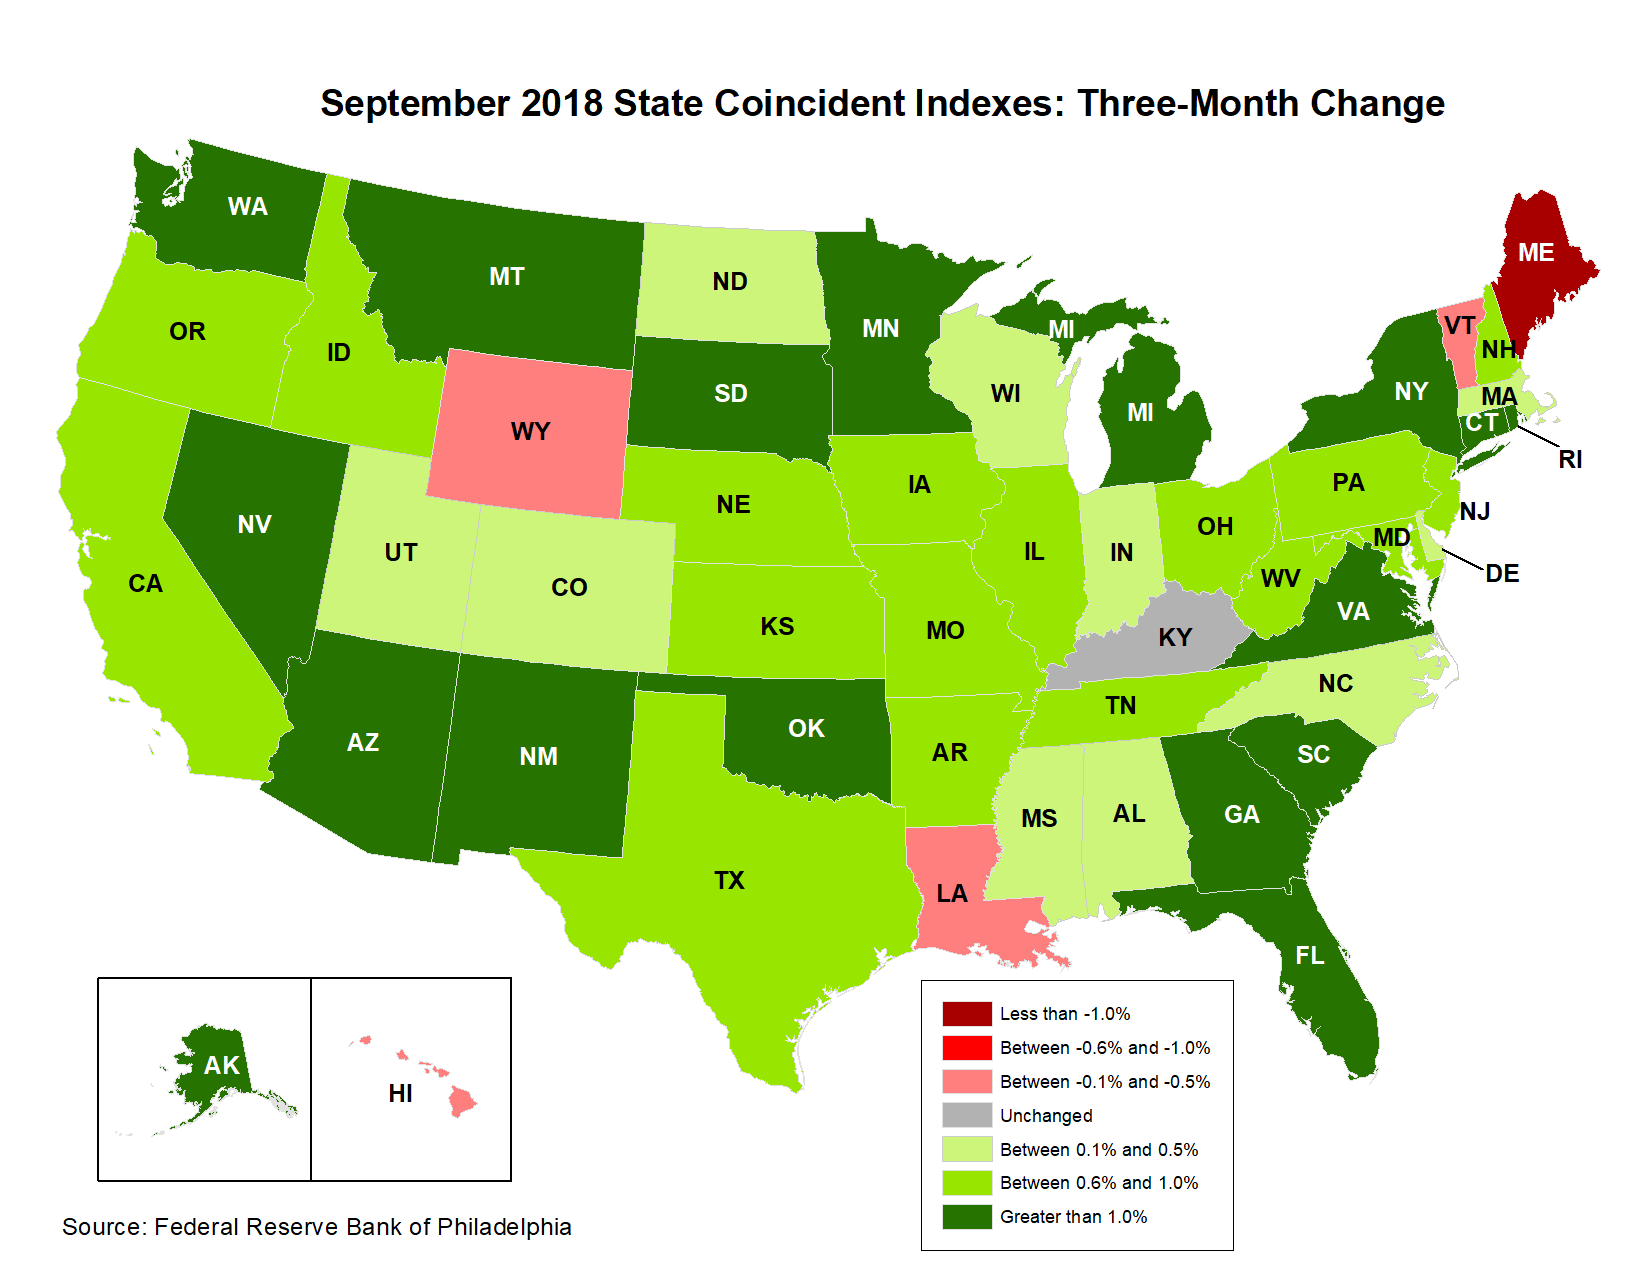 Map of the U.S. showing the State Coincident Indexes Three-Month Change in September 2018